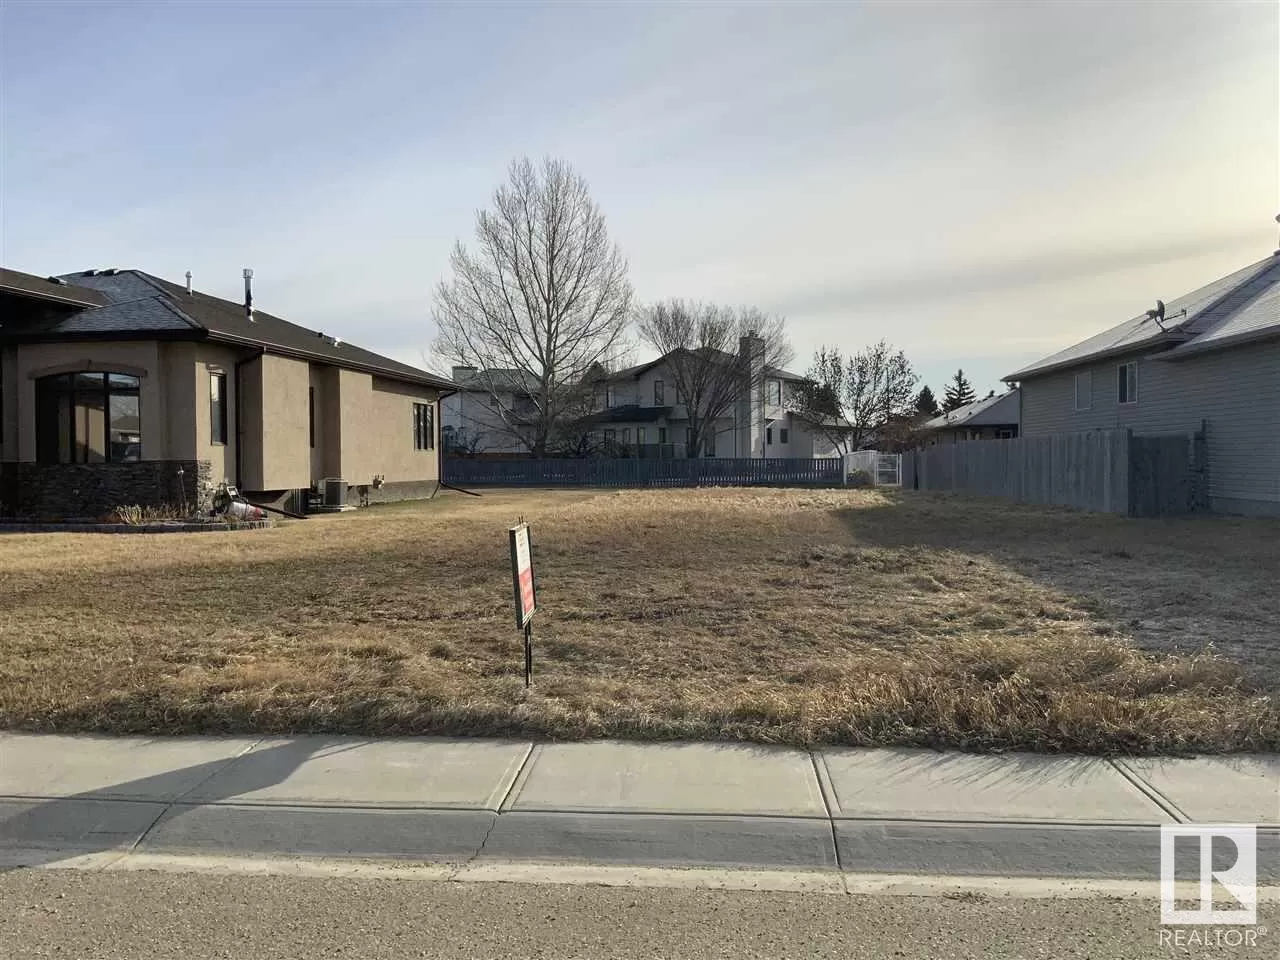 No Building for rent: 128 Northbend Dr, Wetaskiwin, Alberta T9A 3N6